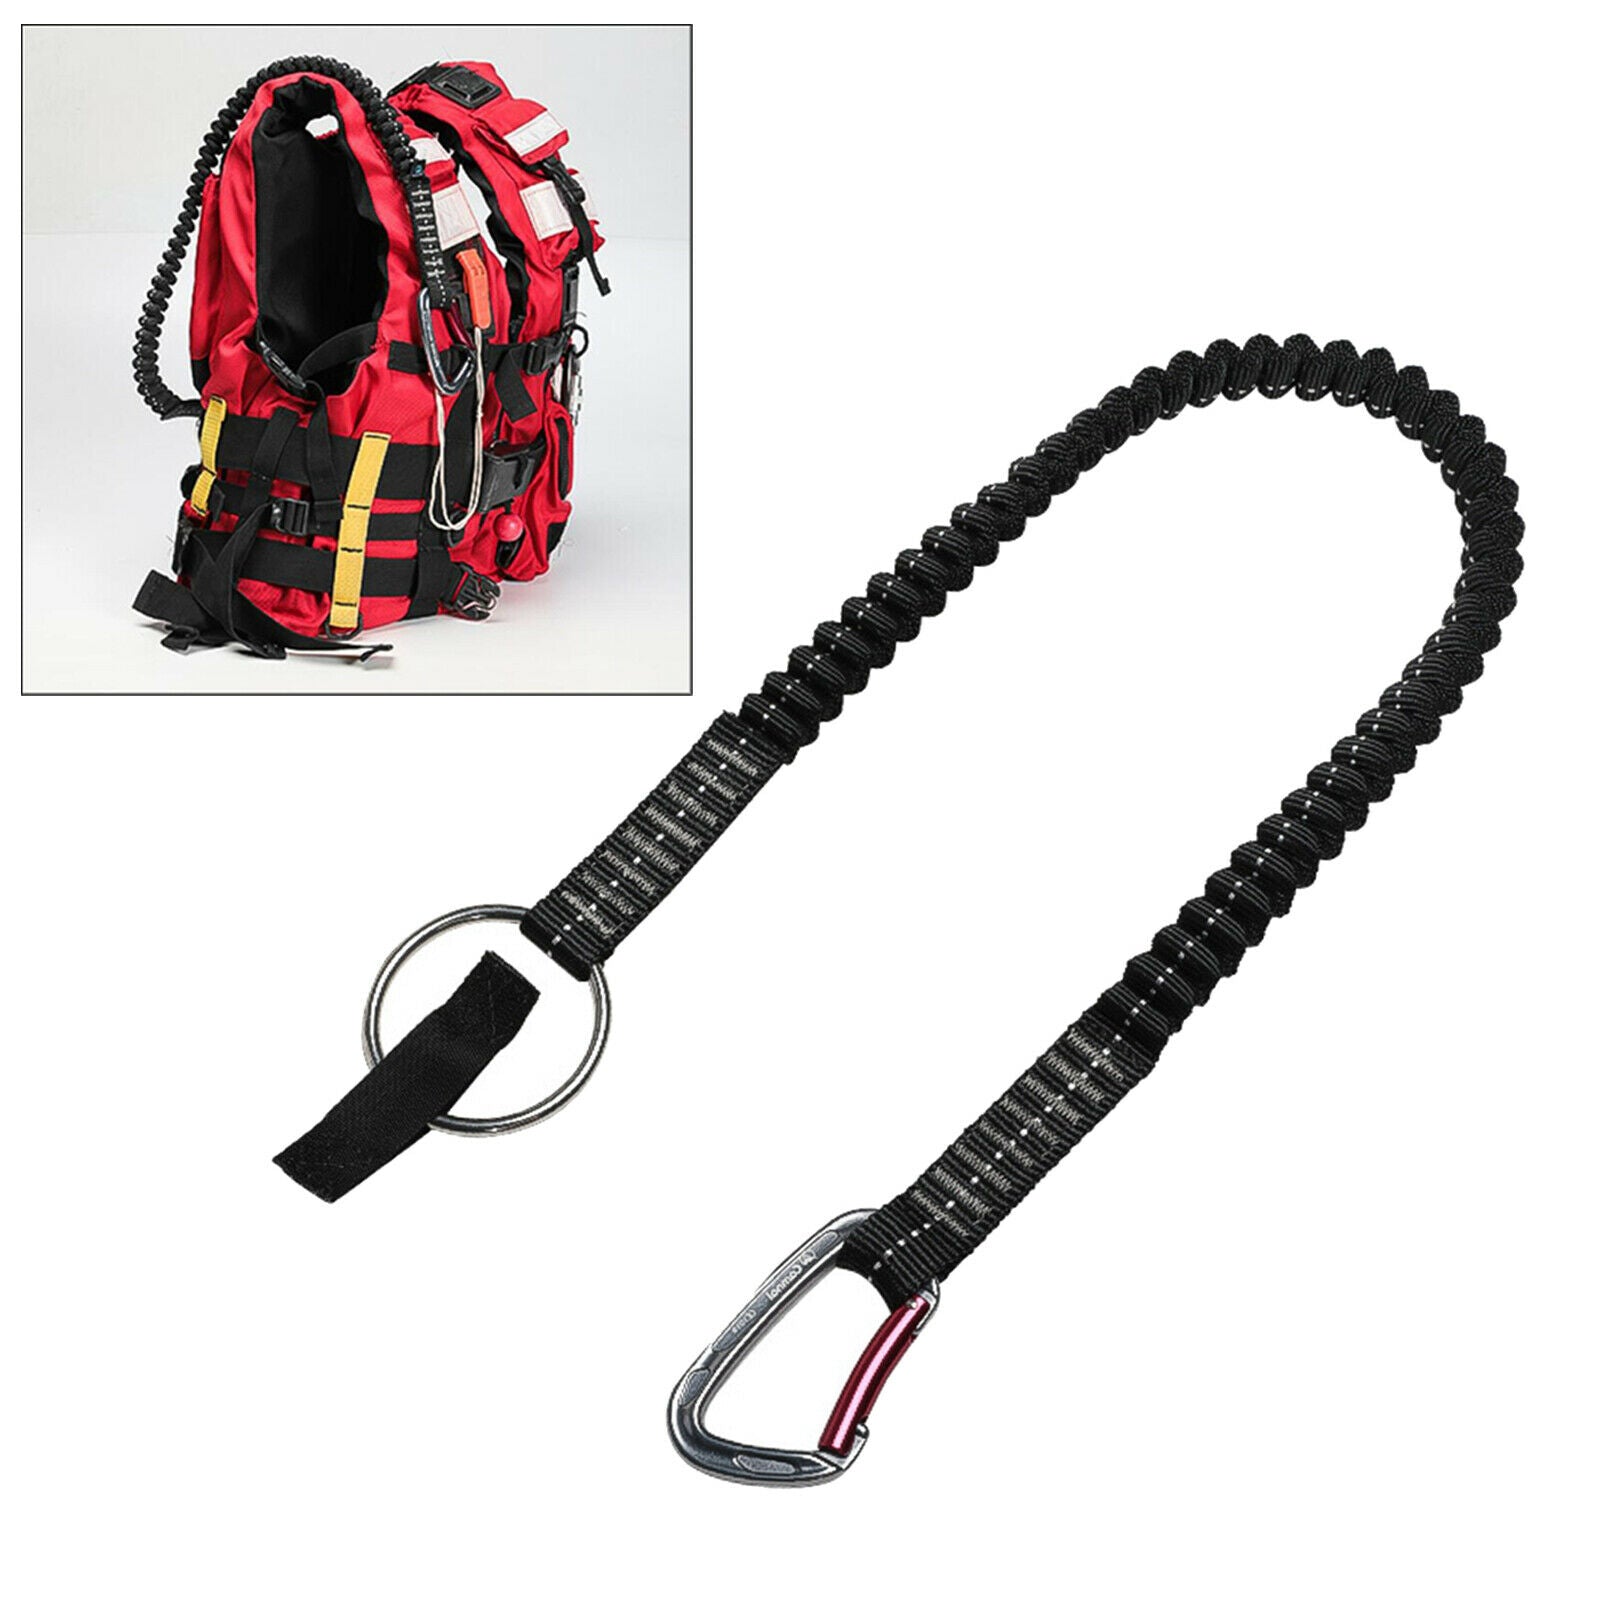 Hunting Safety Harness Emergency Tethering Accessories for Climbing Men